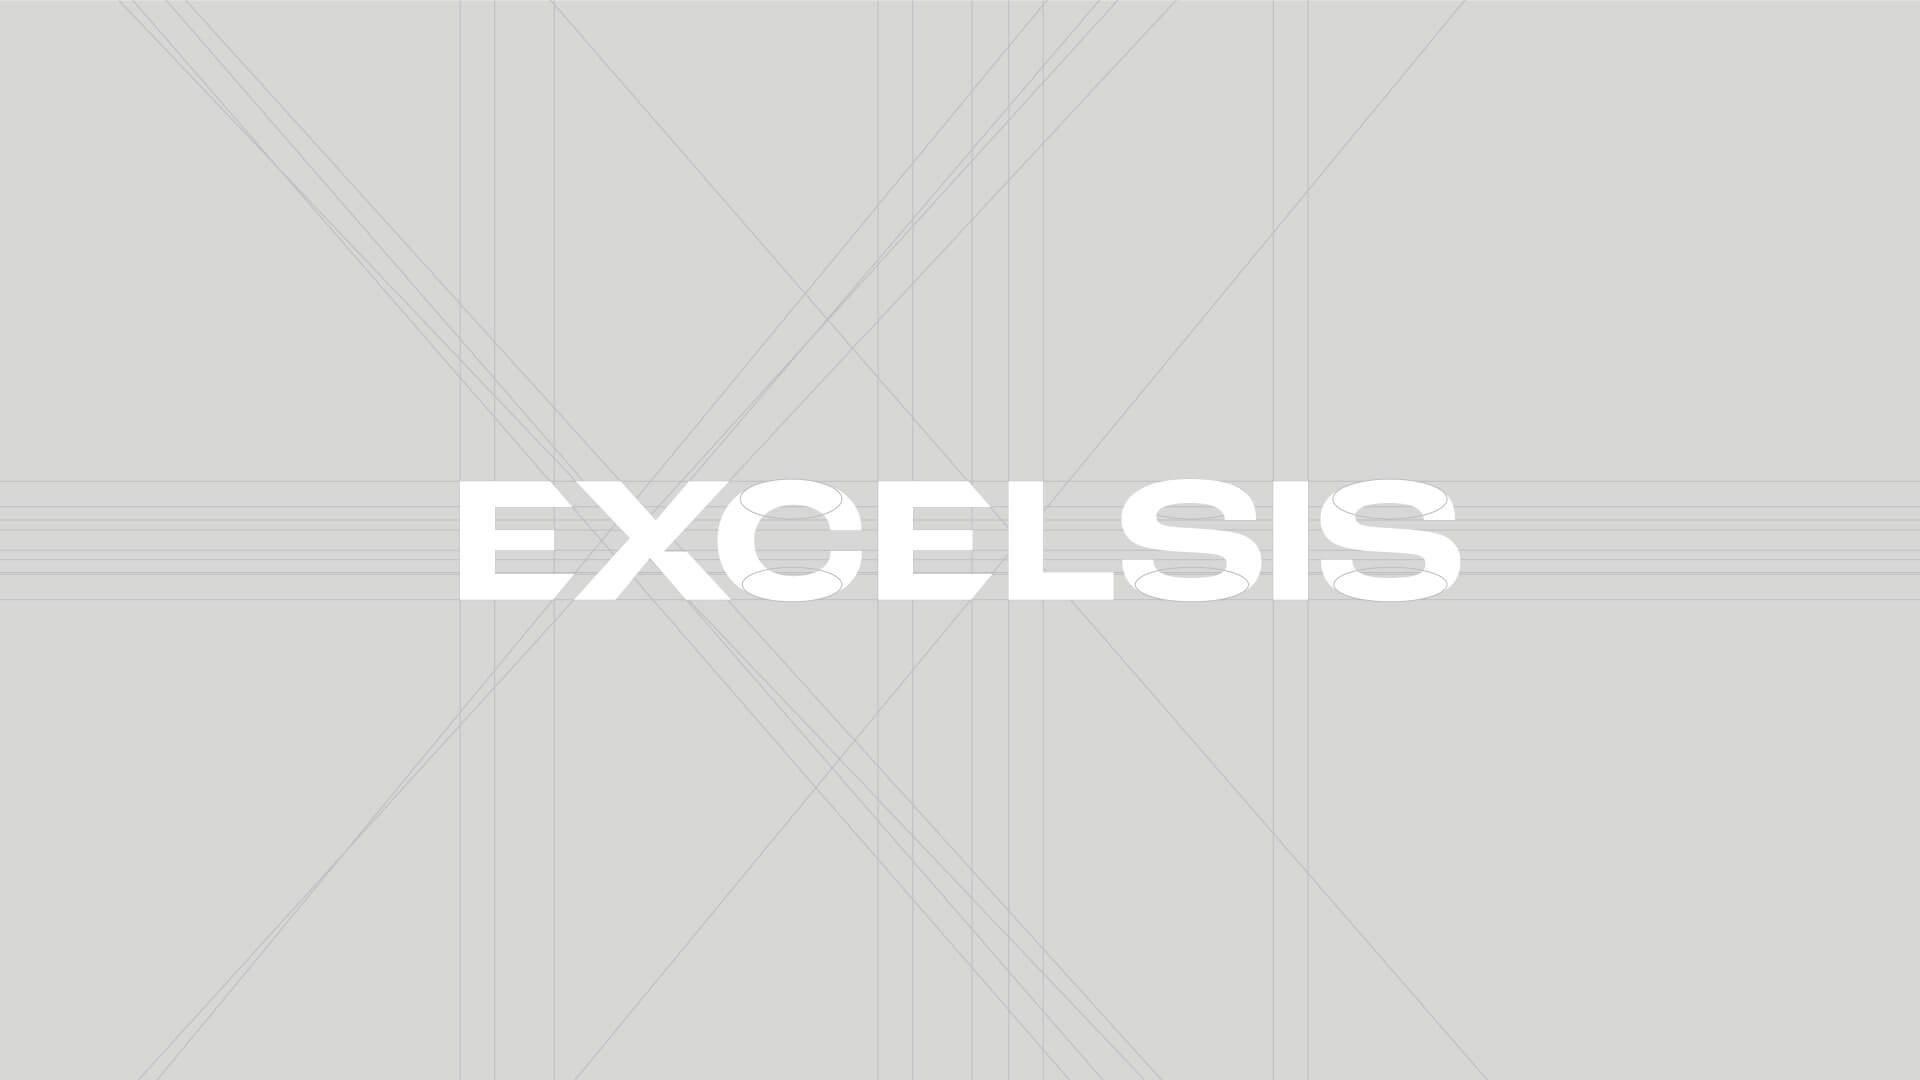 Logo Construction for Excelsis by Vowels Logo Agency